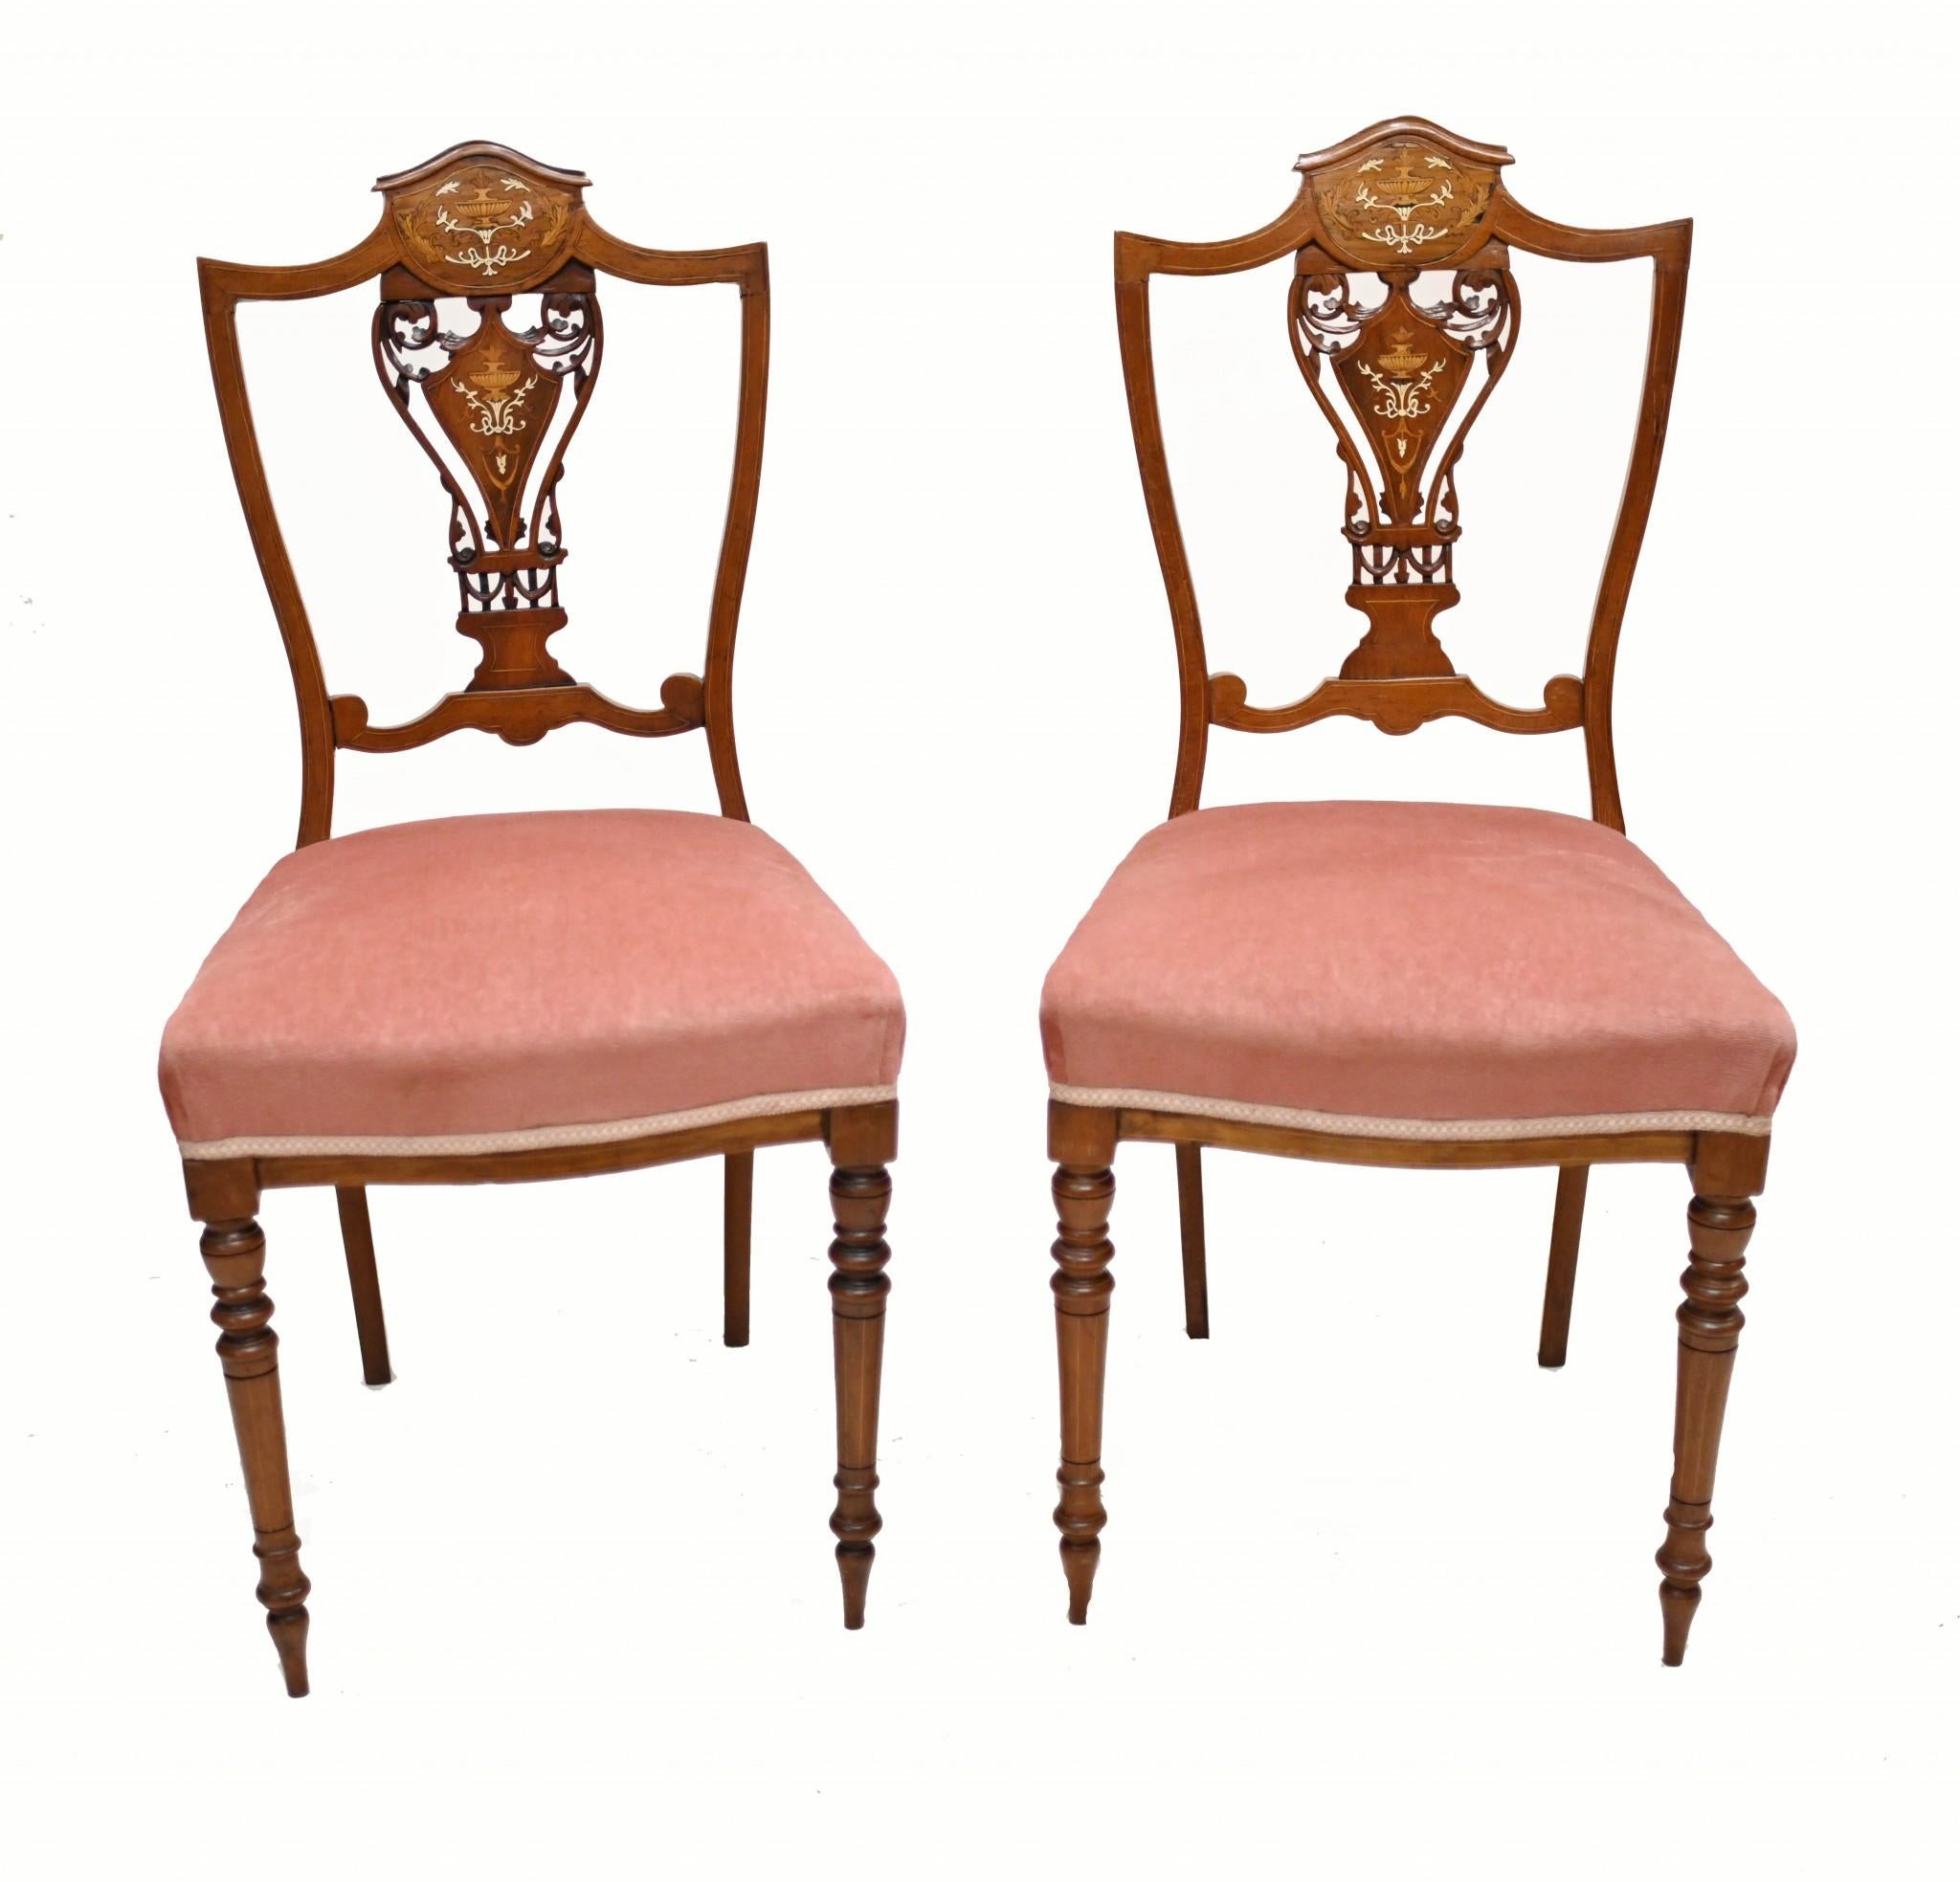 Quality pair of Edwardian inlayed hall chairs in mahogany
We date this lovely pair of accent chairs to circa 1910
Back rest - with shield back - features intricate inlay work including classical urns and floral motifs
Purchased from a private